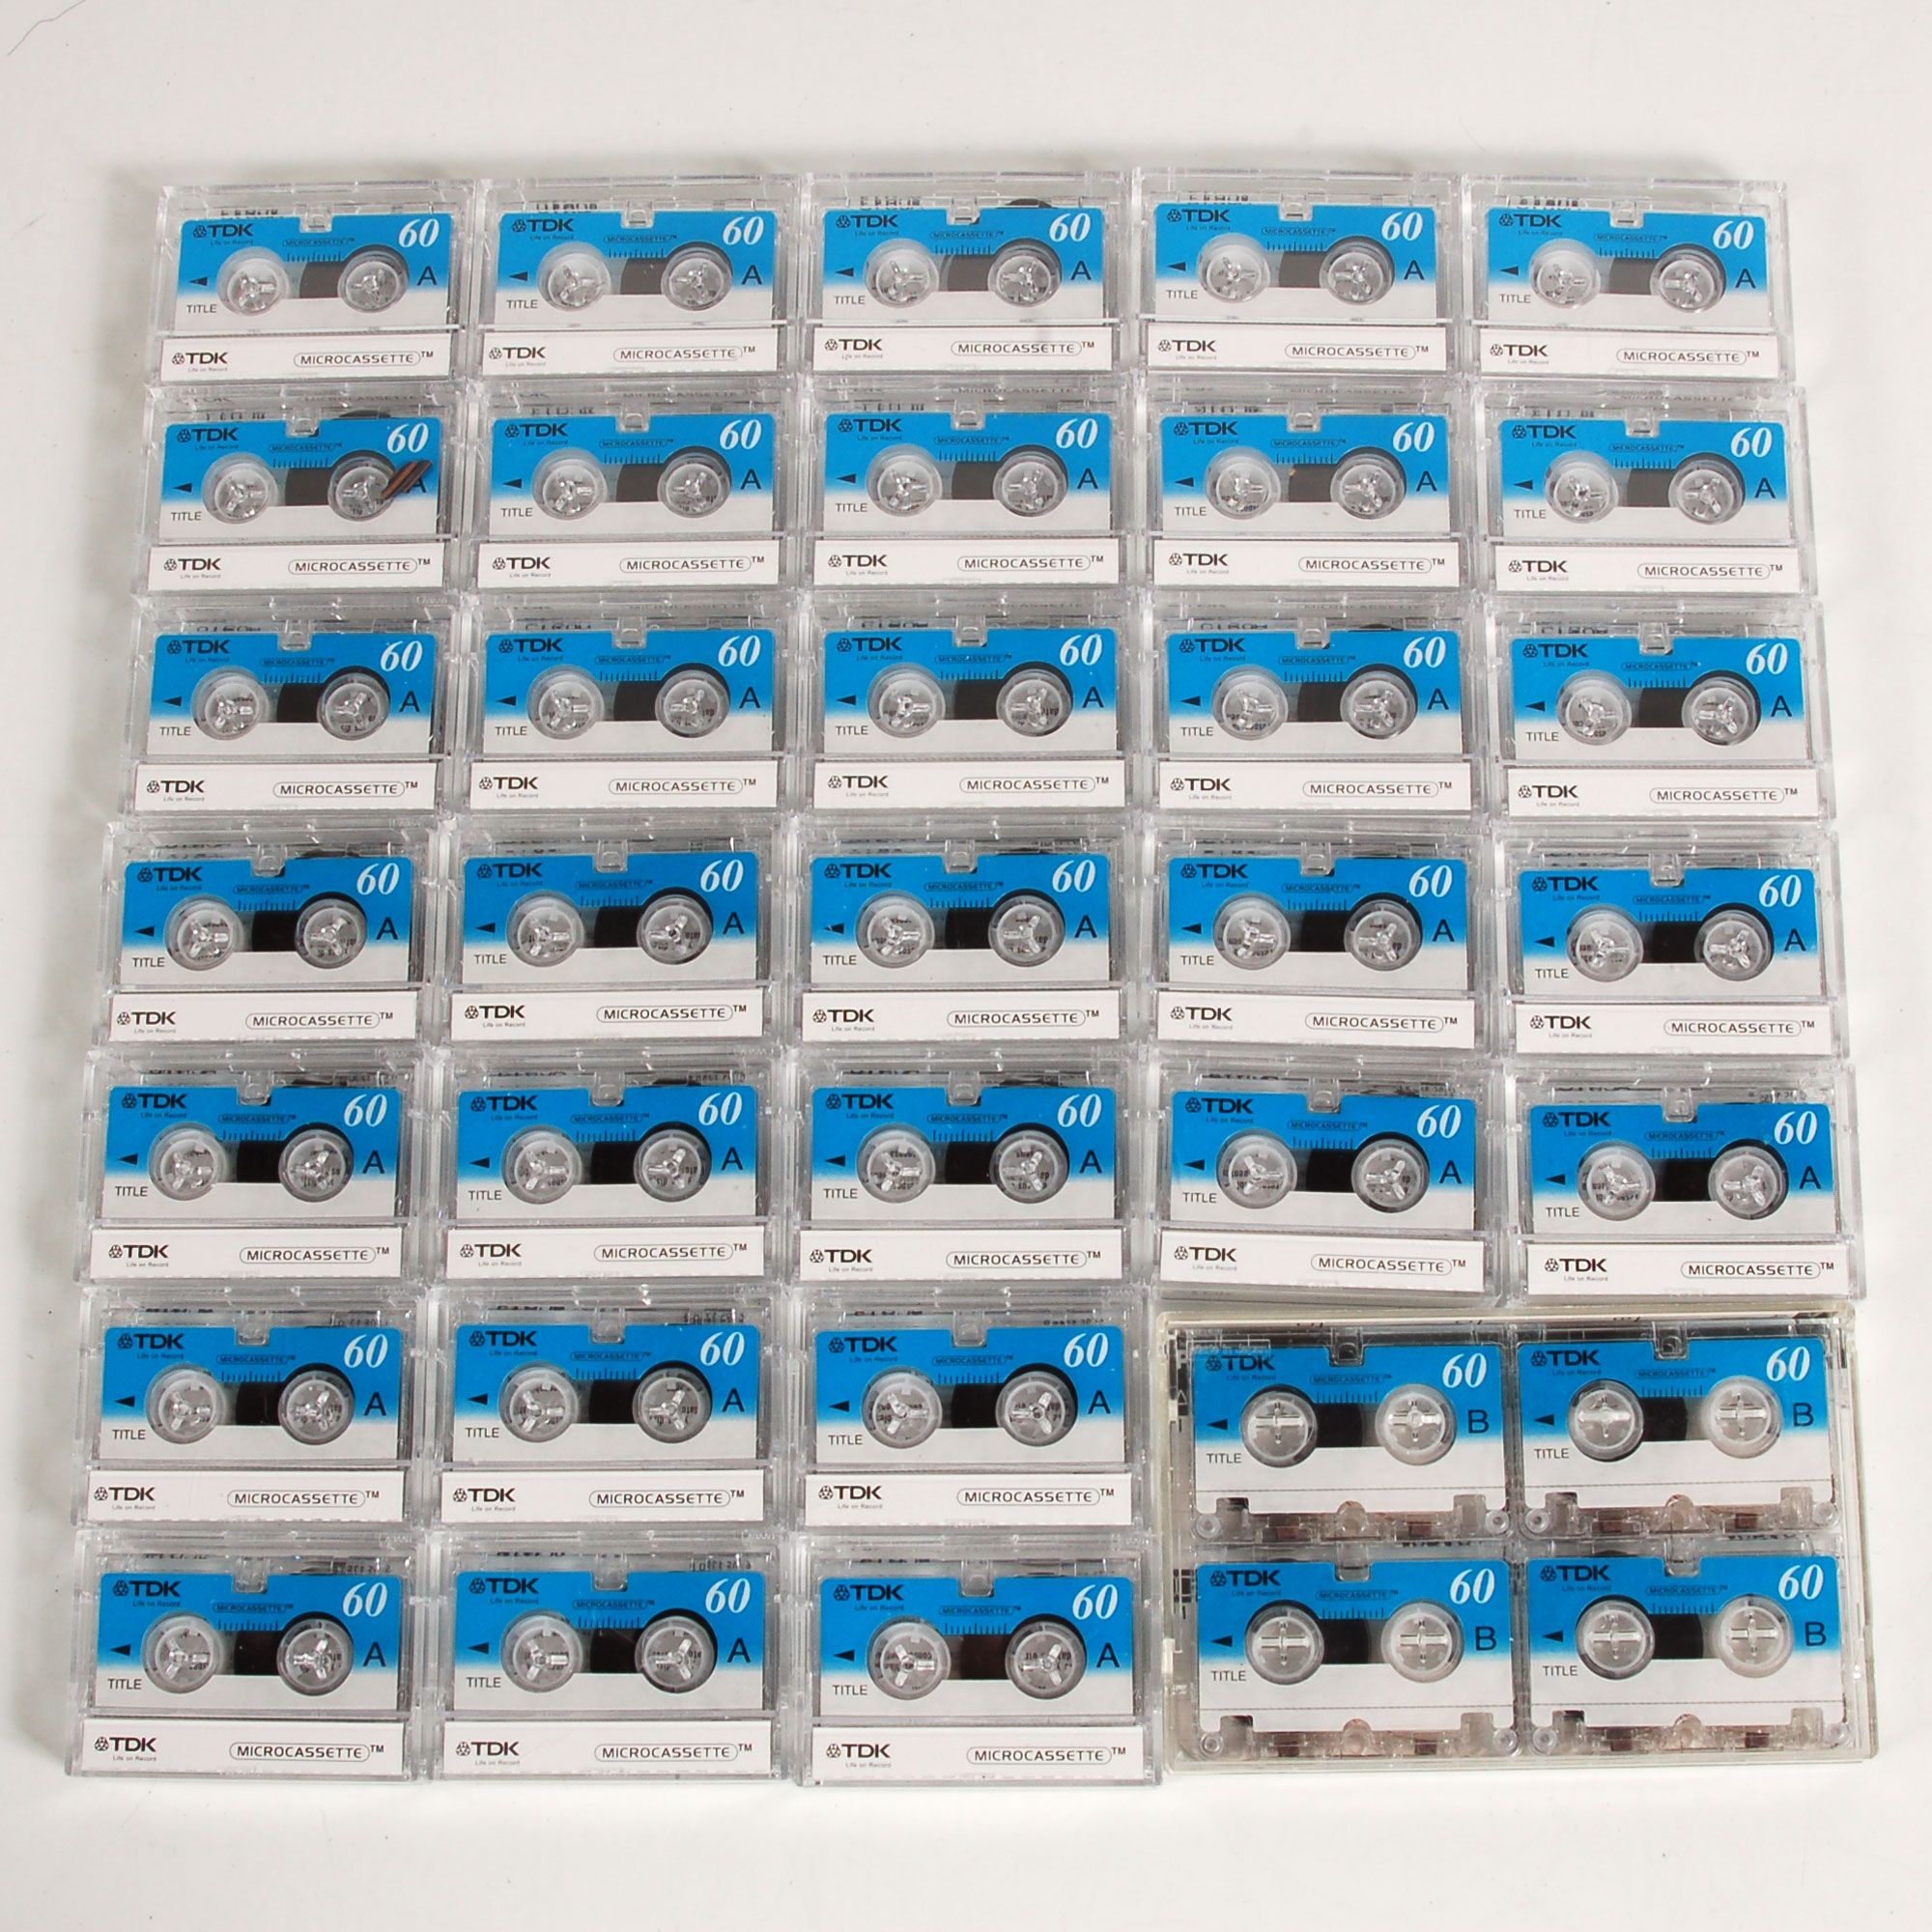 Up for auction is a lot of 35 Microcassette tapes in unused condition